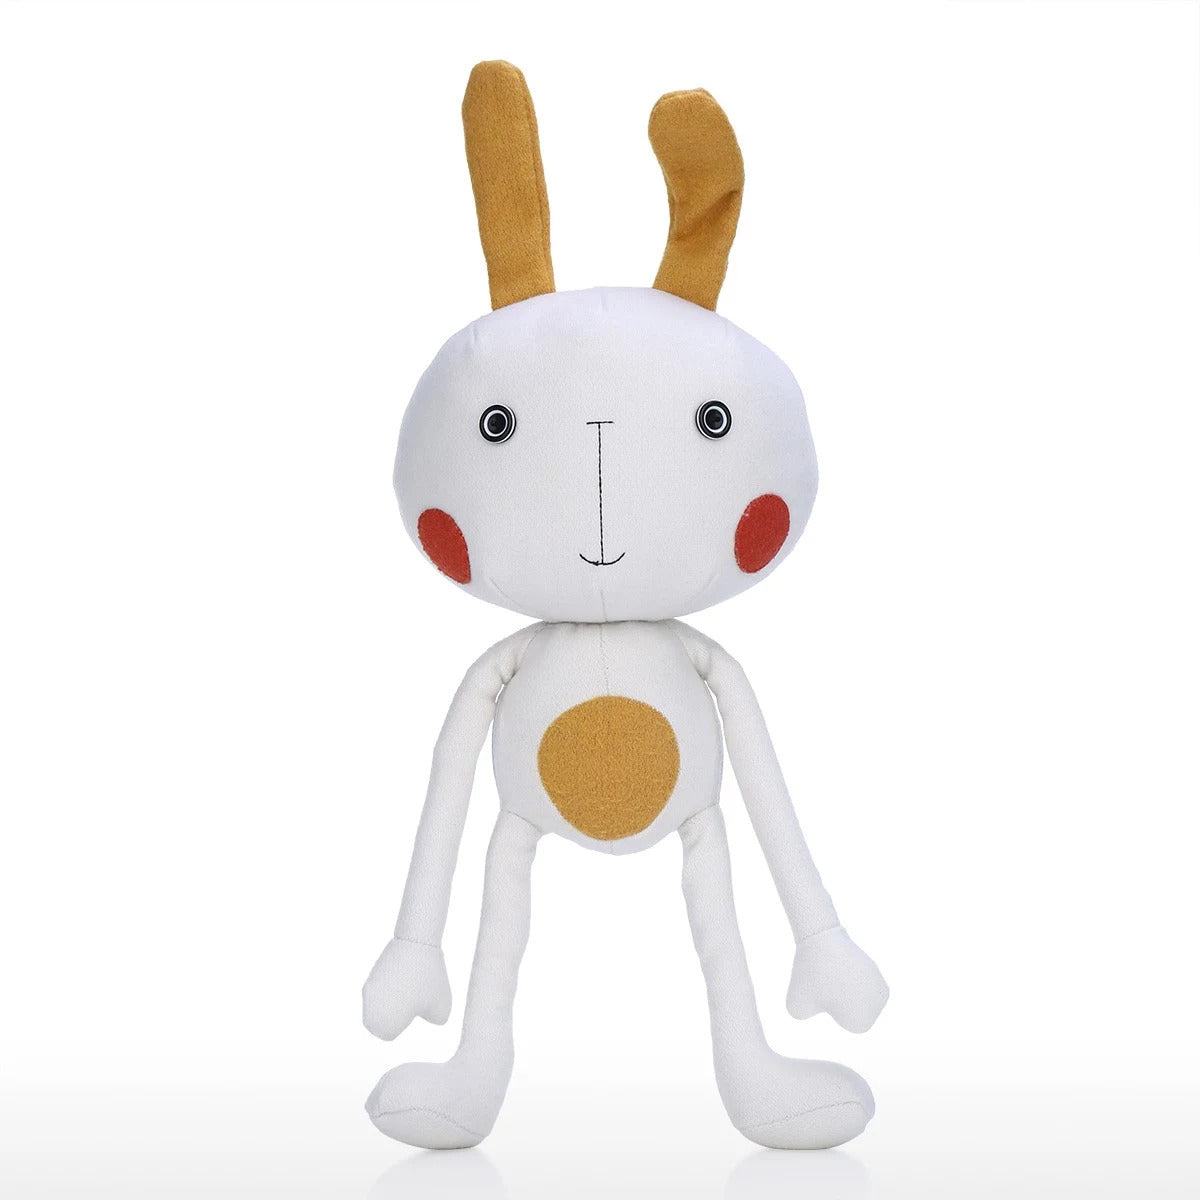 Cute Bunny Toy by White Rabbit